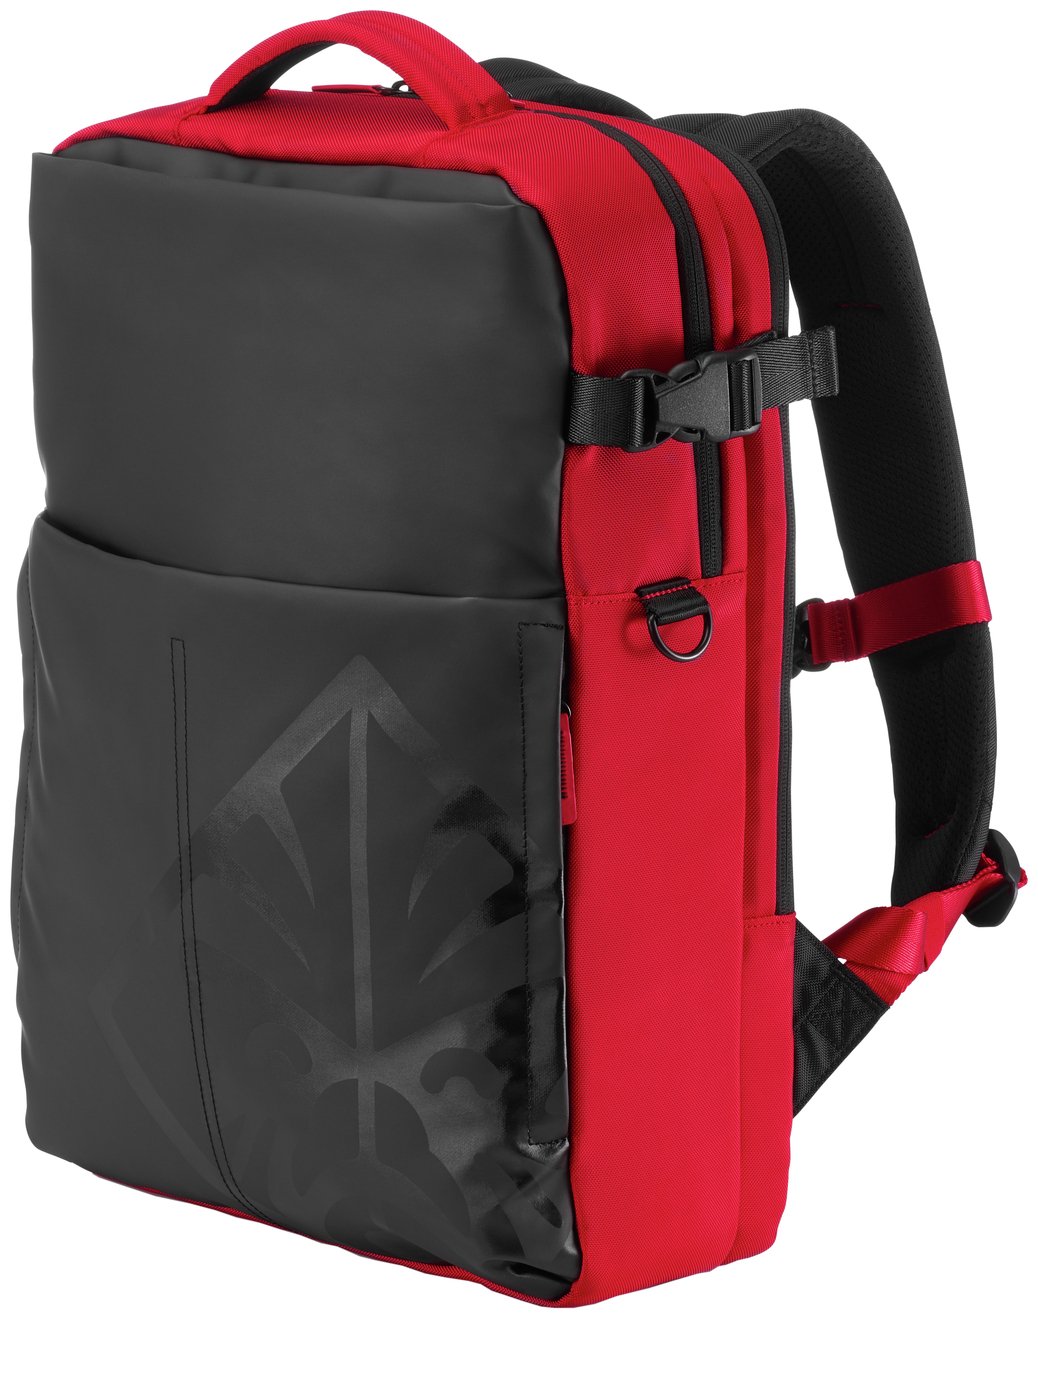 HP Omen 17.3 Inch Laptop Backpack - Red